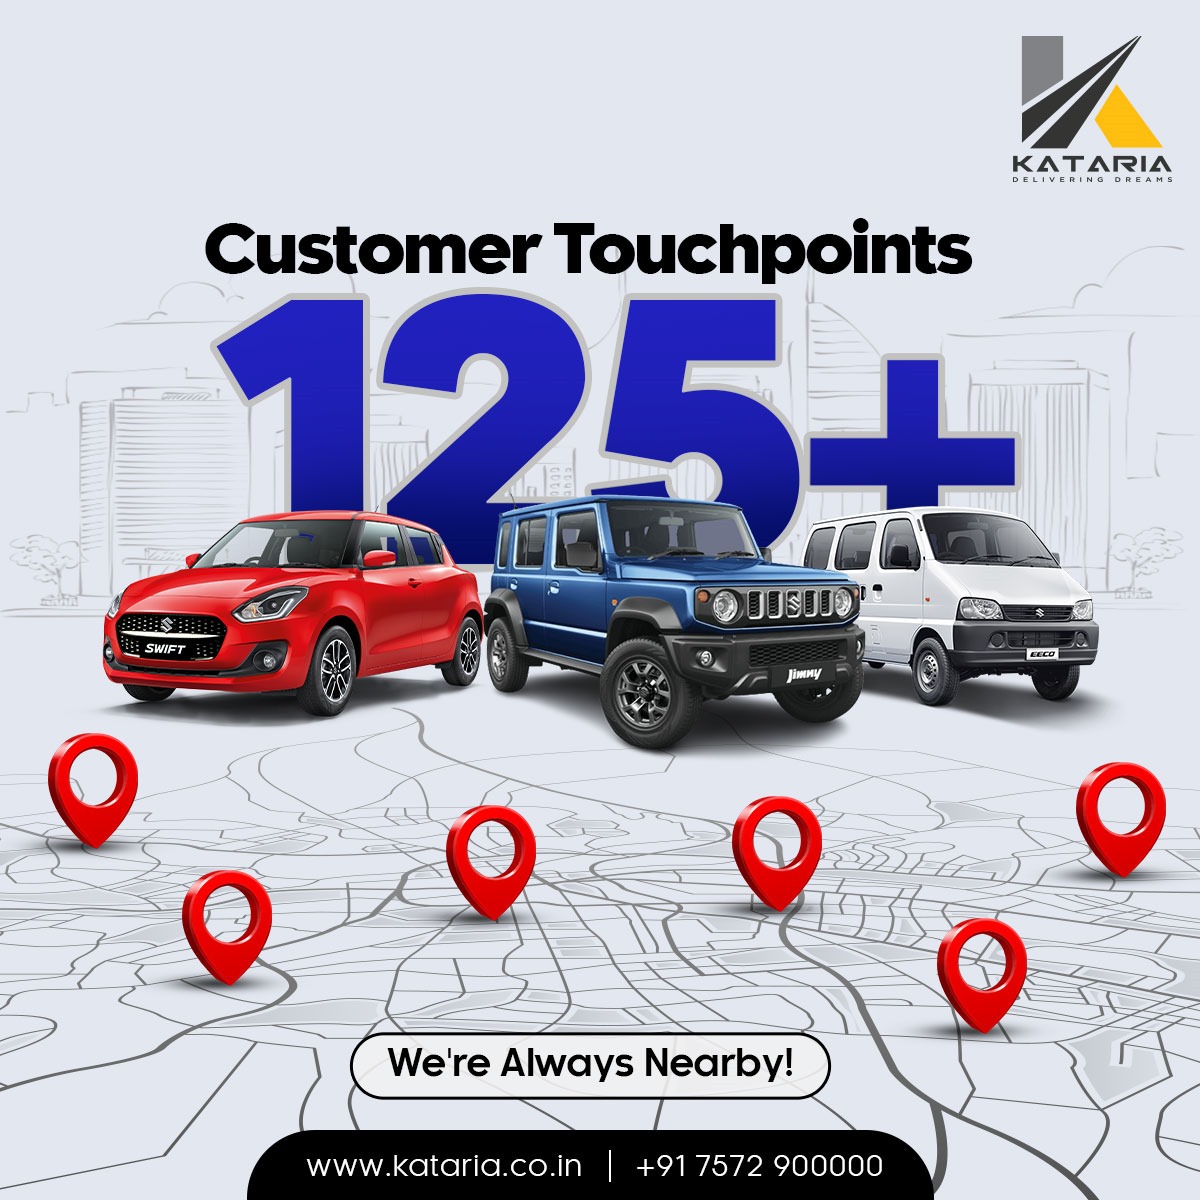 We're just around the corner! With 125+ customer touchpoints, Kataria Automobiles is always nearby to serve you.

Mail us at leads@kataria.co.in or call us at +91 7572900000

#kataria #katariaautomobiles #katariagroup #MarutiSuzuki #KatariaCare #BuyYourOwnCar #BuyFromKataria